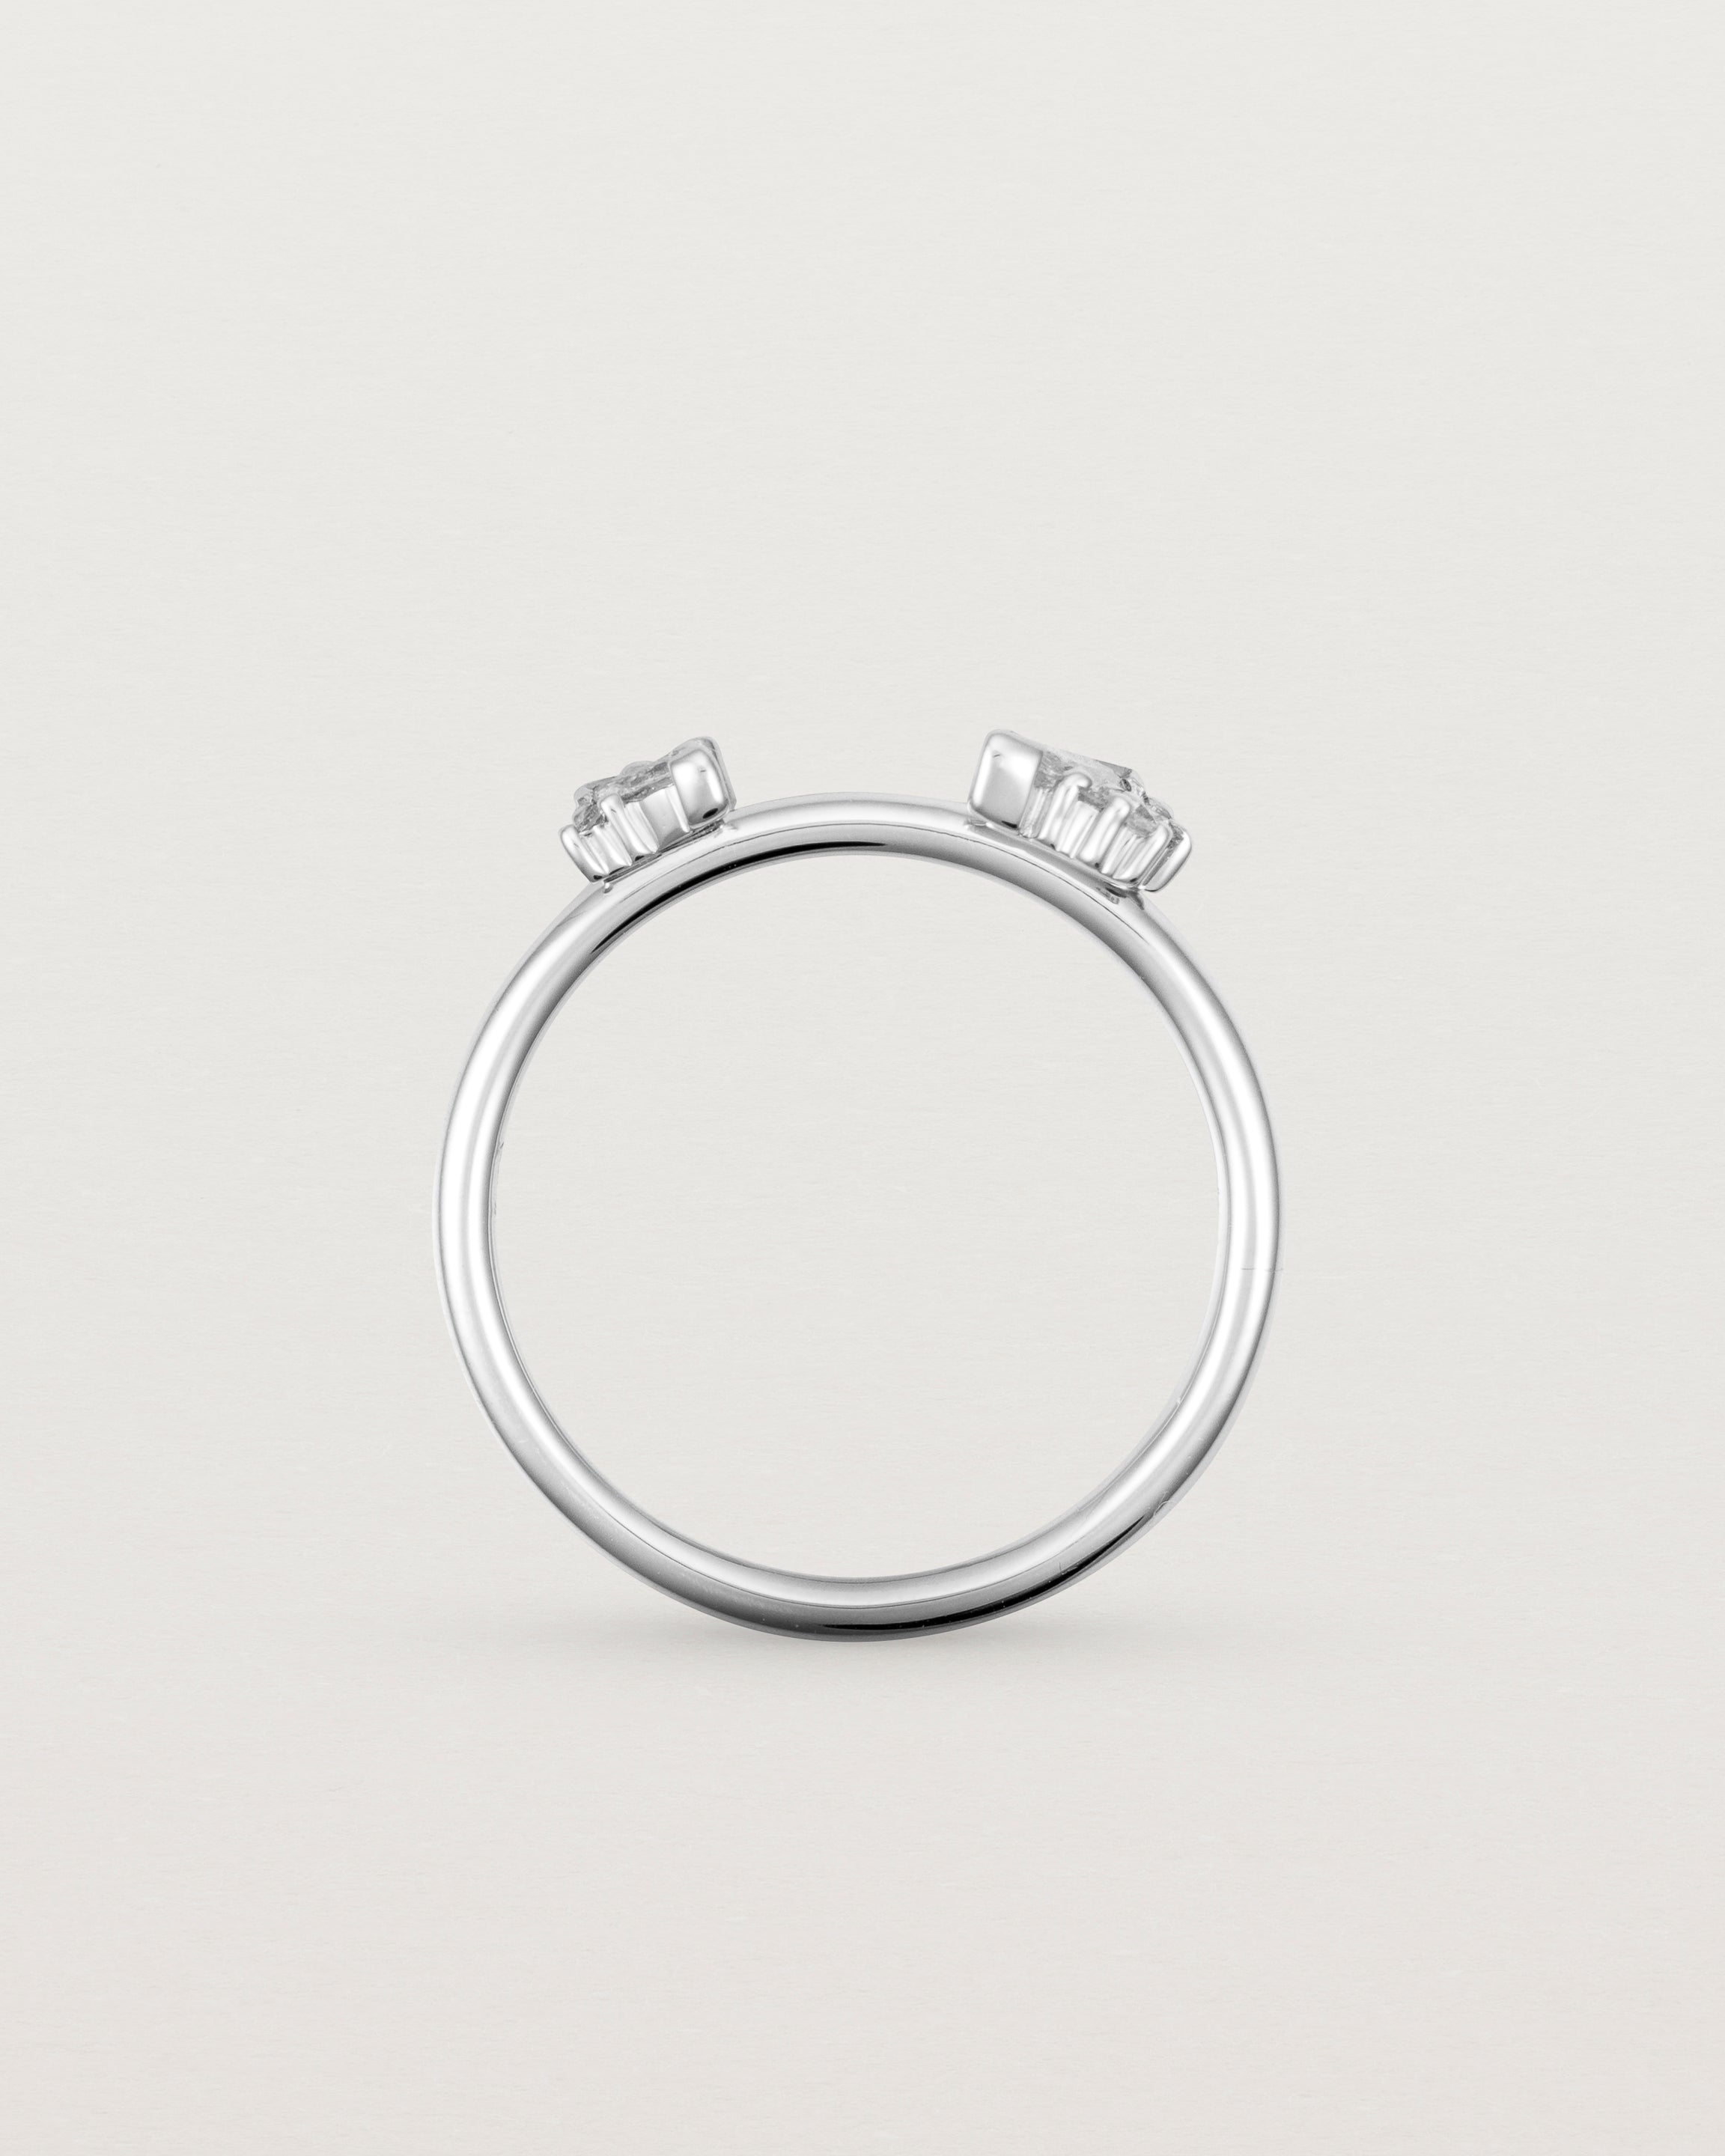 Standing view of the Freya Cluster Ring | Diamonds in White Gold.